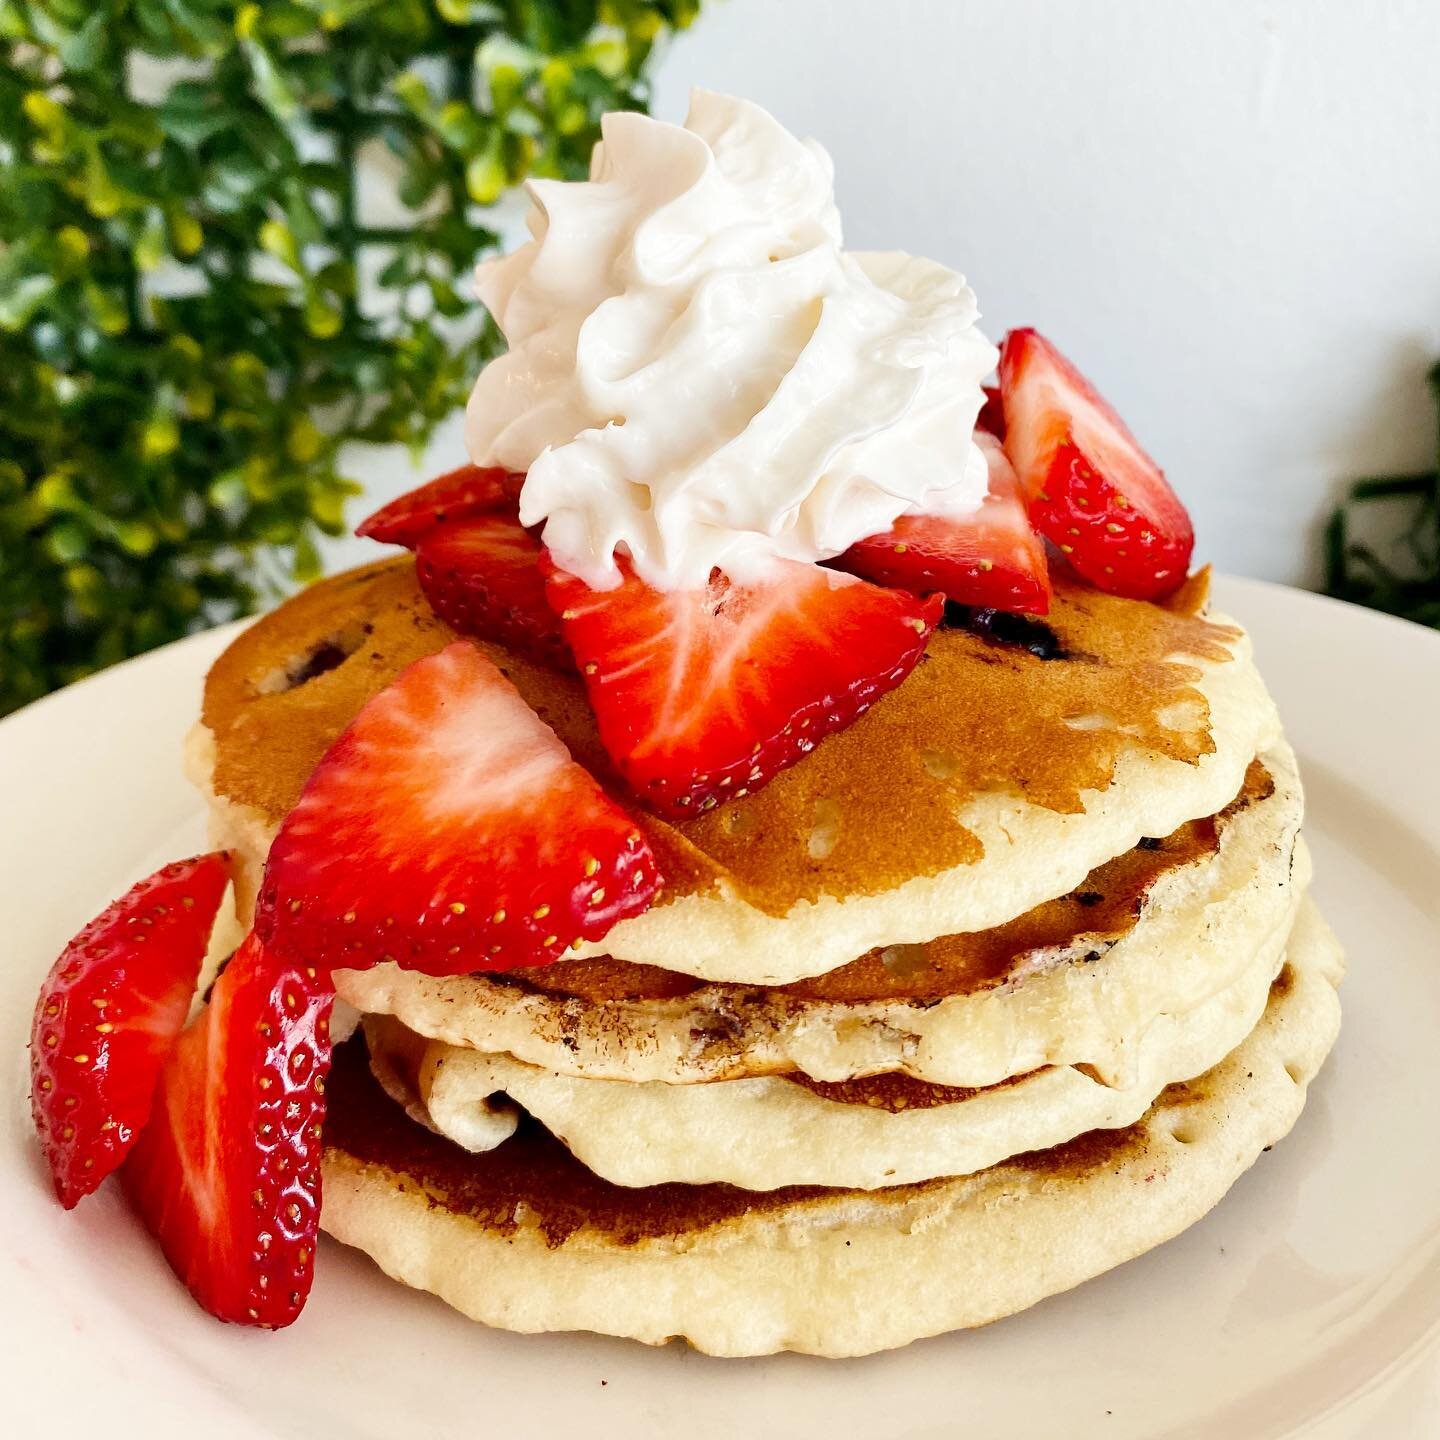 GOOD MORNING!!! The sun is shining and we&rsquo;ve got this special Sunday Stack for you: Berries &amp; Cream ❤️. Four fluffy blueberry pancakes, fresh strawberries, whipped cream, coconut butter, and dark maple syrup.. that&rsquo;s about how patriot